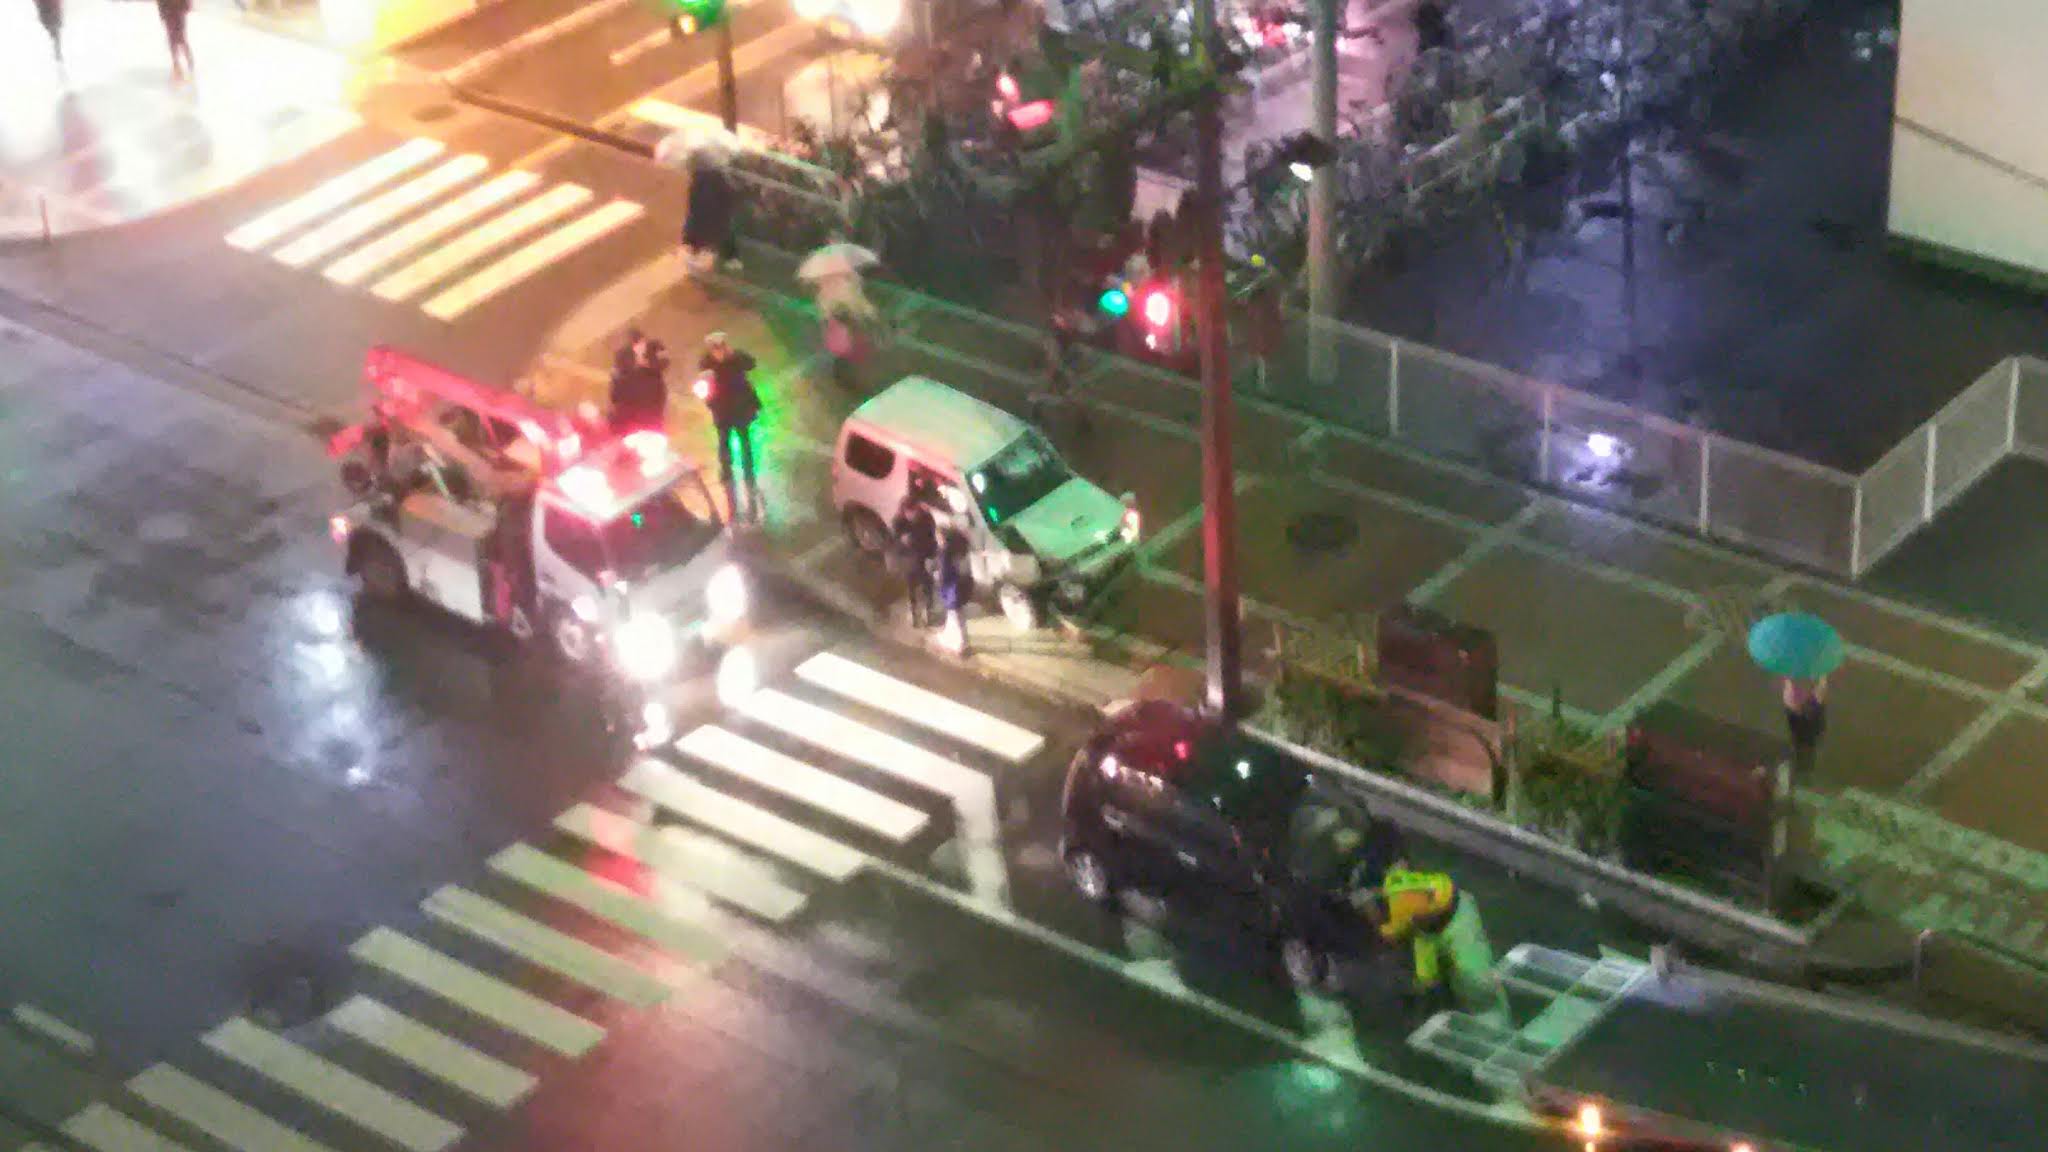 I was on the 3rd line of the crosswalk when these cars crashed and miraculously spun around me.